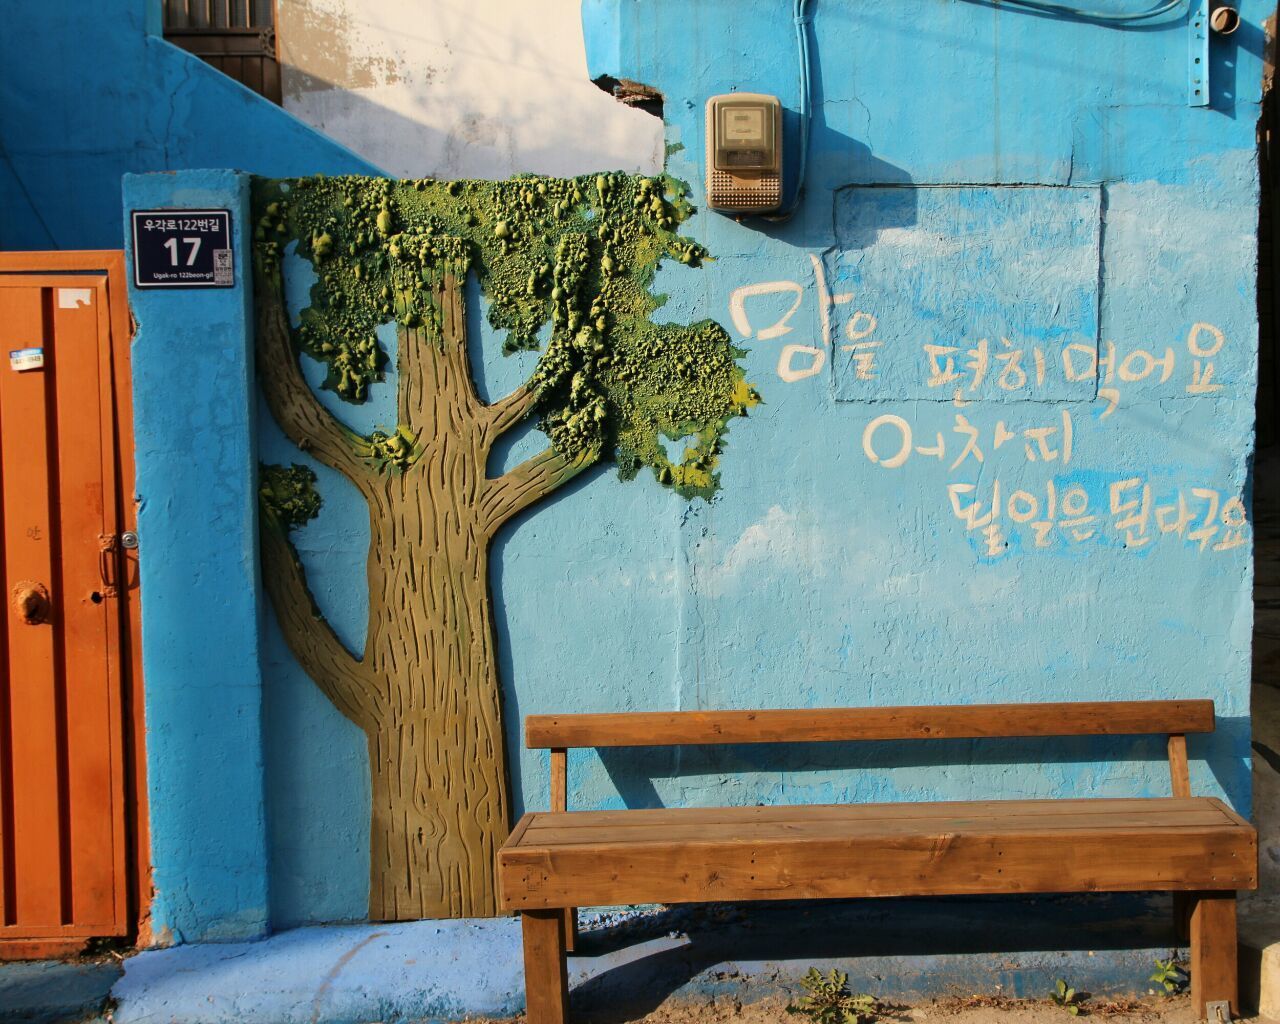 built structure, architecture, wall - building feature, building exterior, graffiti, wall, text, door, blue, house, day, plant, communication, no people, outdoors, western script, potted plant, closed, sunlight, old